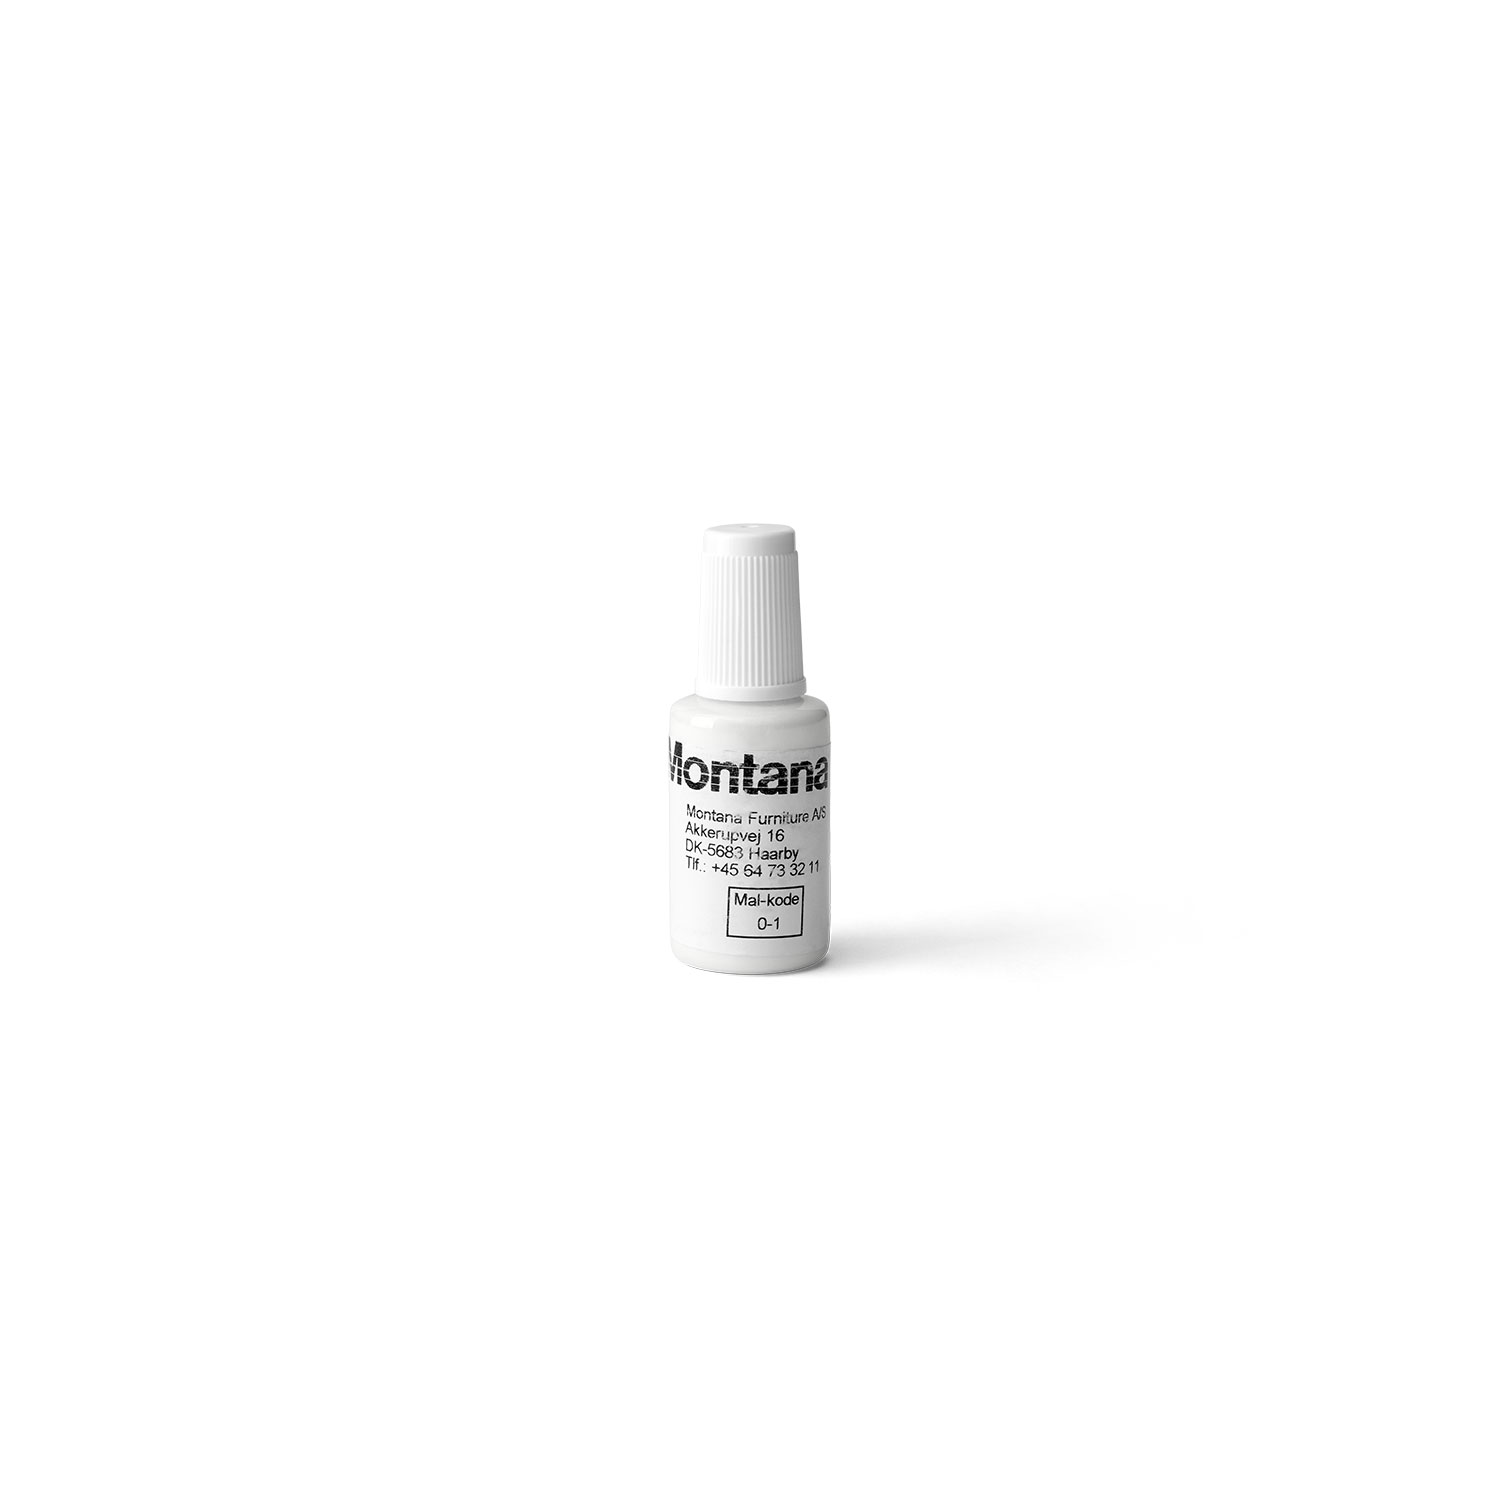 REPLAK touch-up lacquer, New White